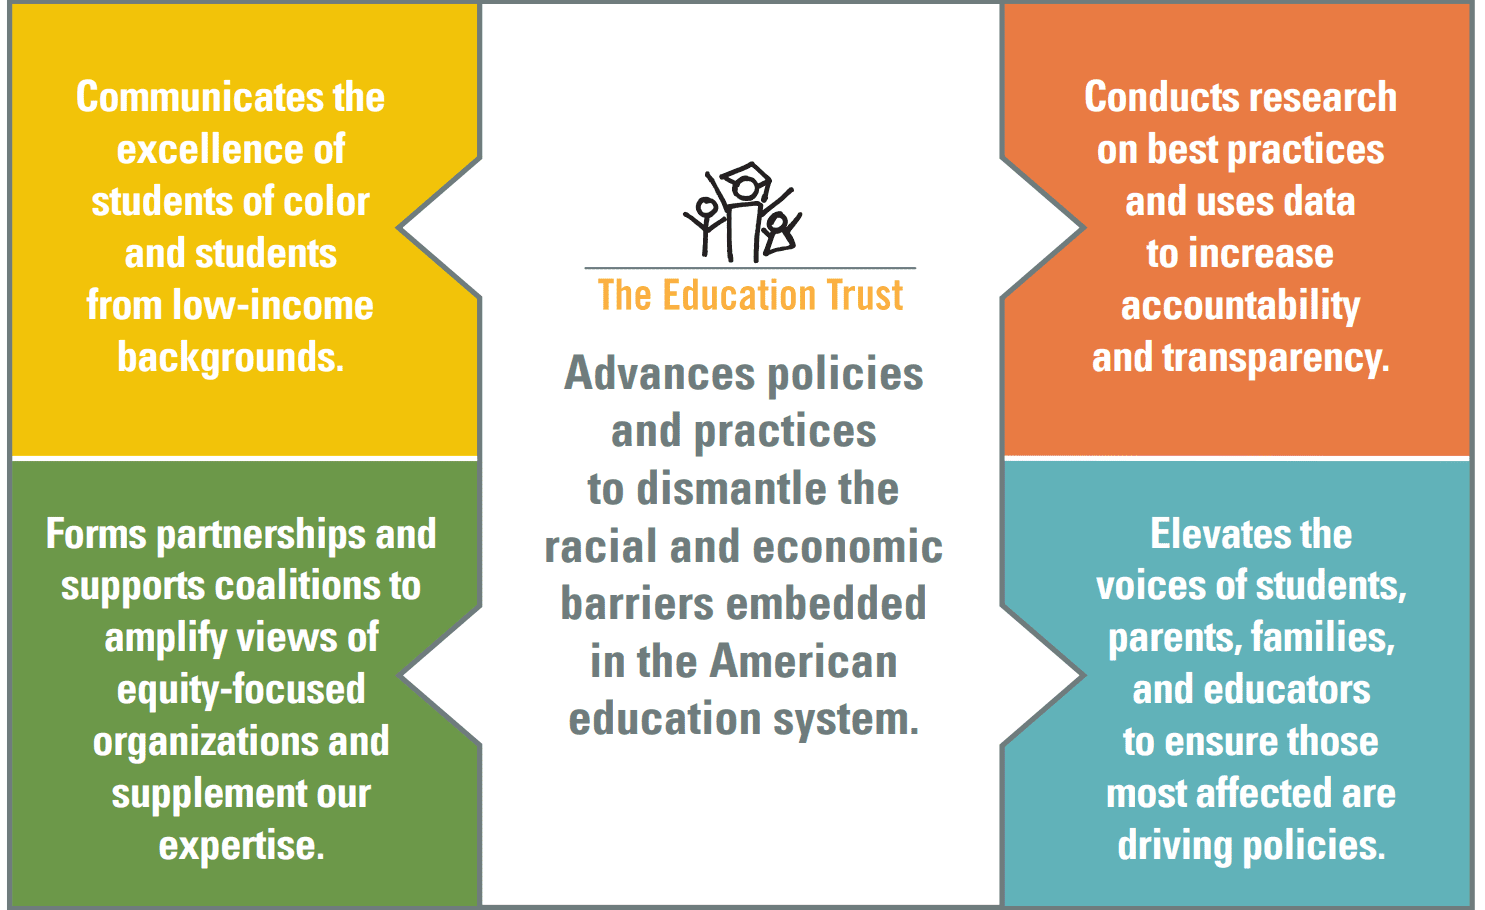 The Education Trust advances policies and practices to dismantle the racial and economic barriers embedded in the American Education system